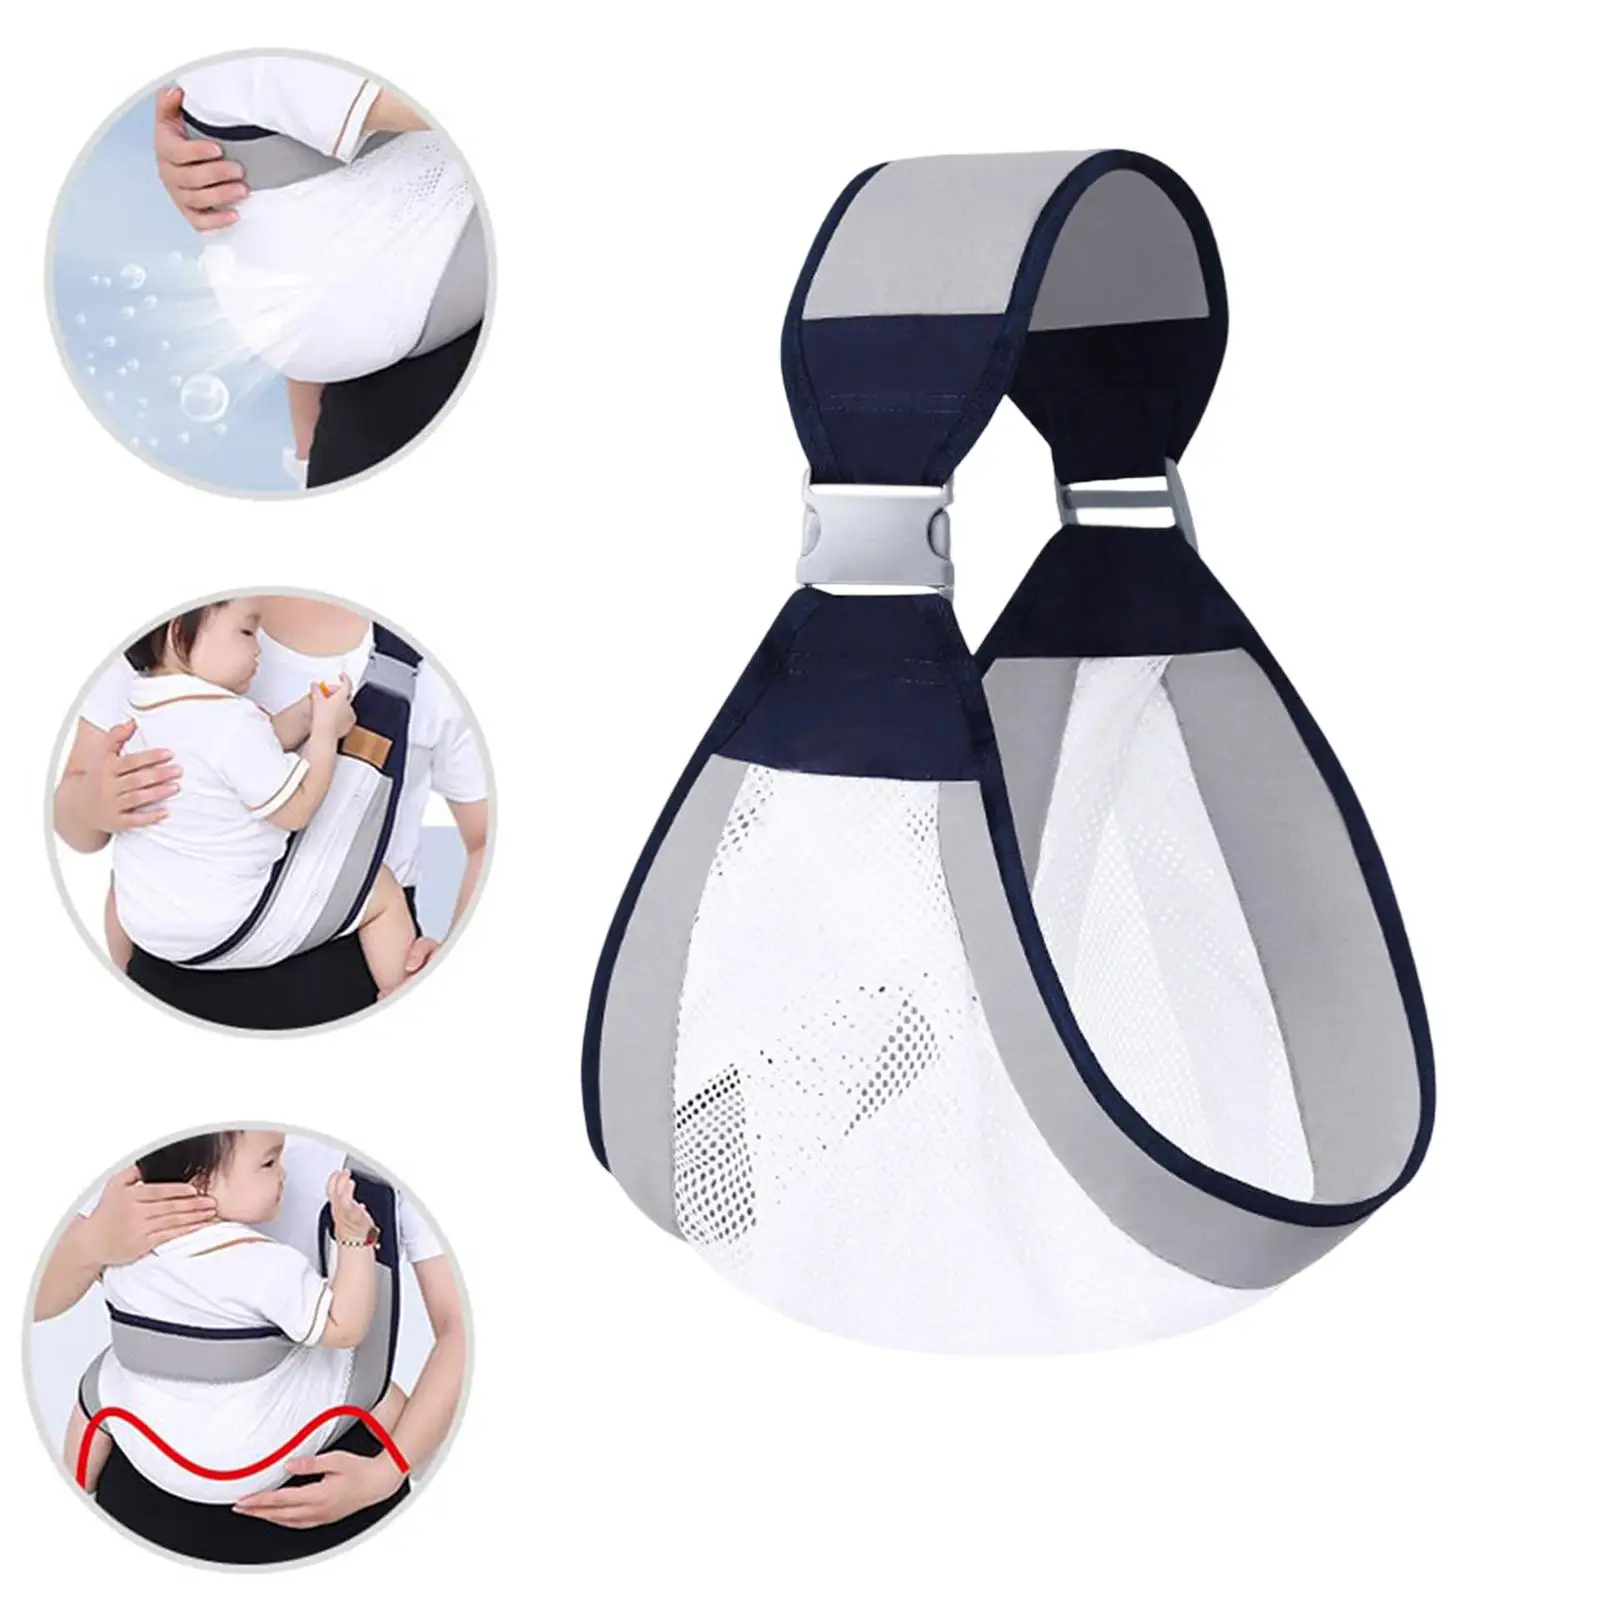 Baby Carrier Sling, Baby Holder Straps, Infant Nursing Cover Carrier with Clip, Infant Sling up to 20kg 4-36 Months Baby